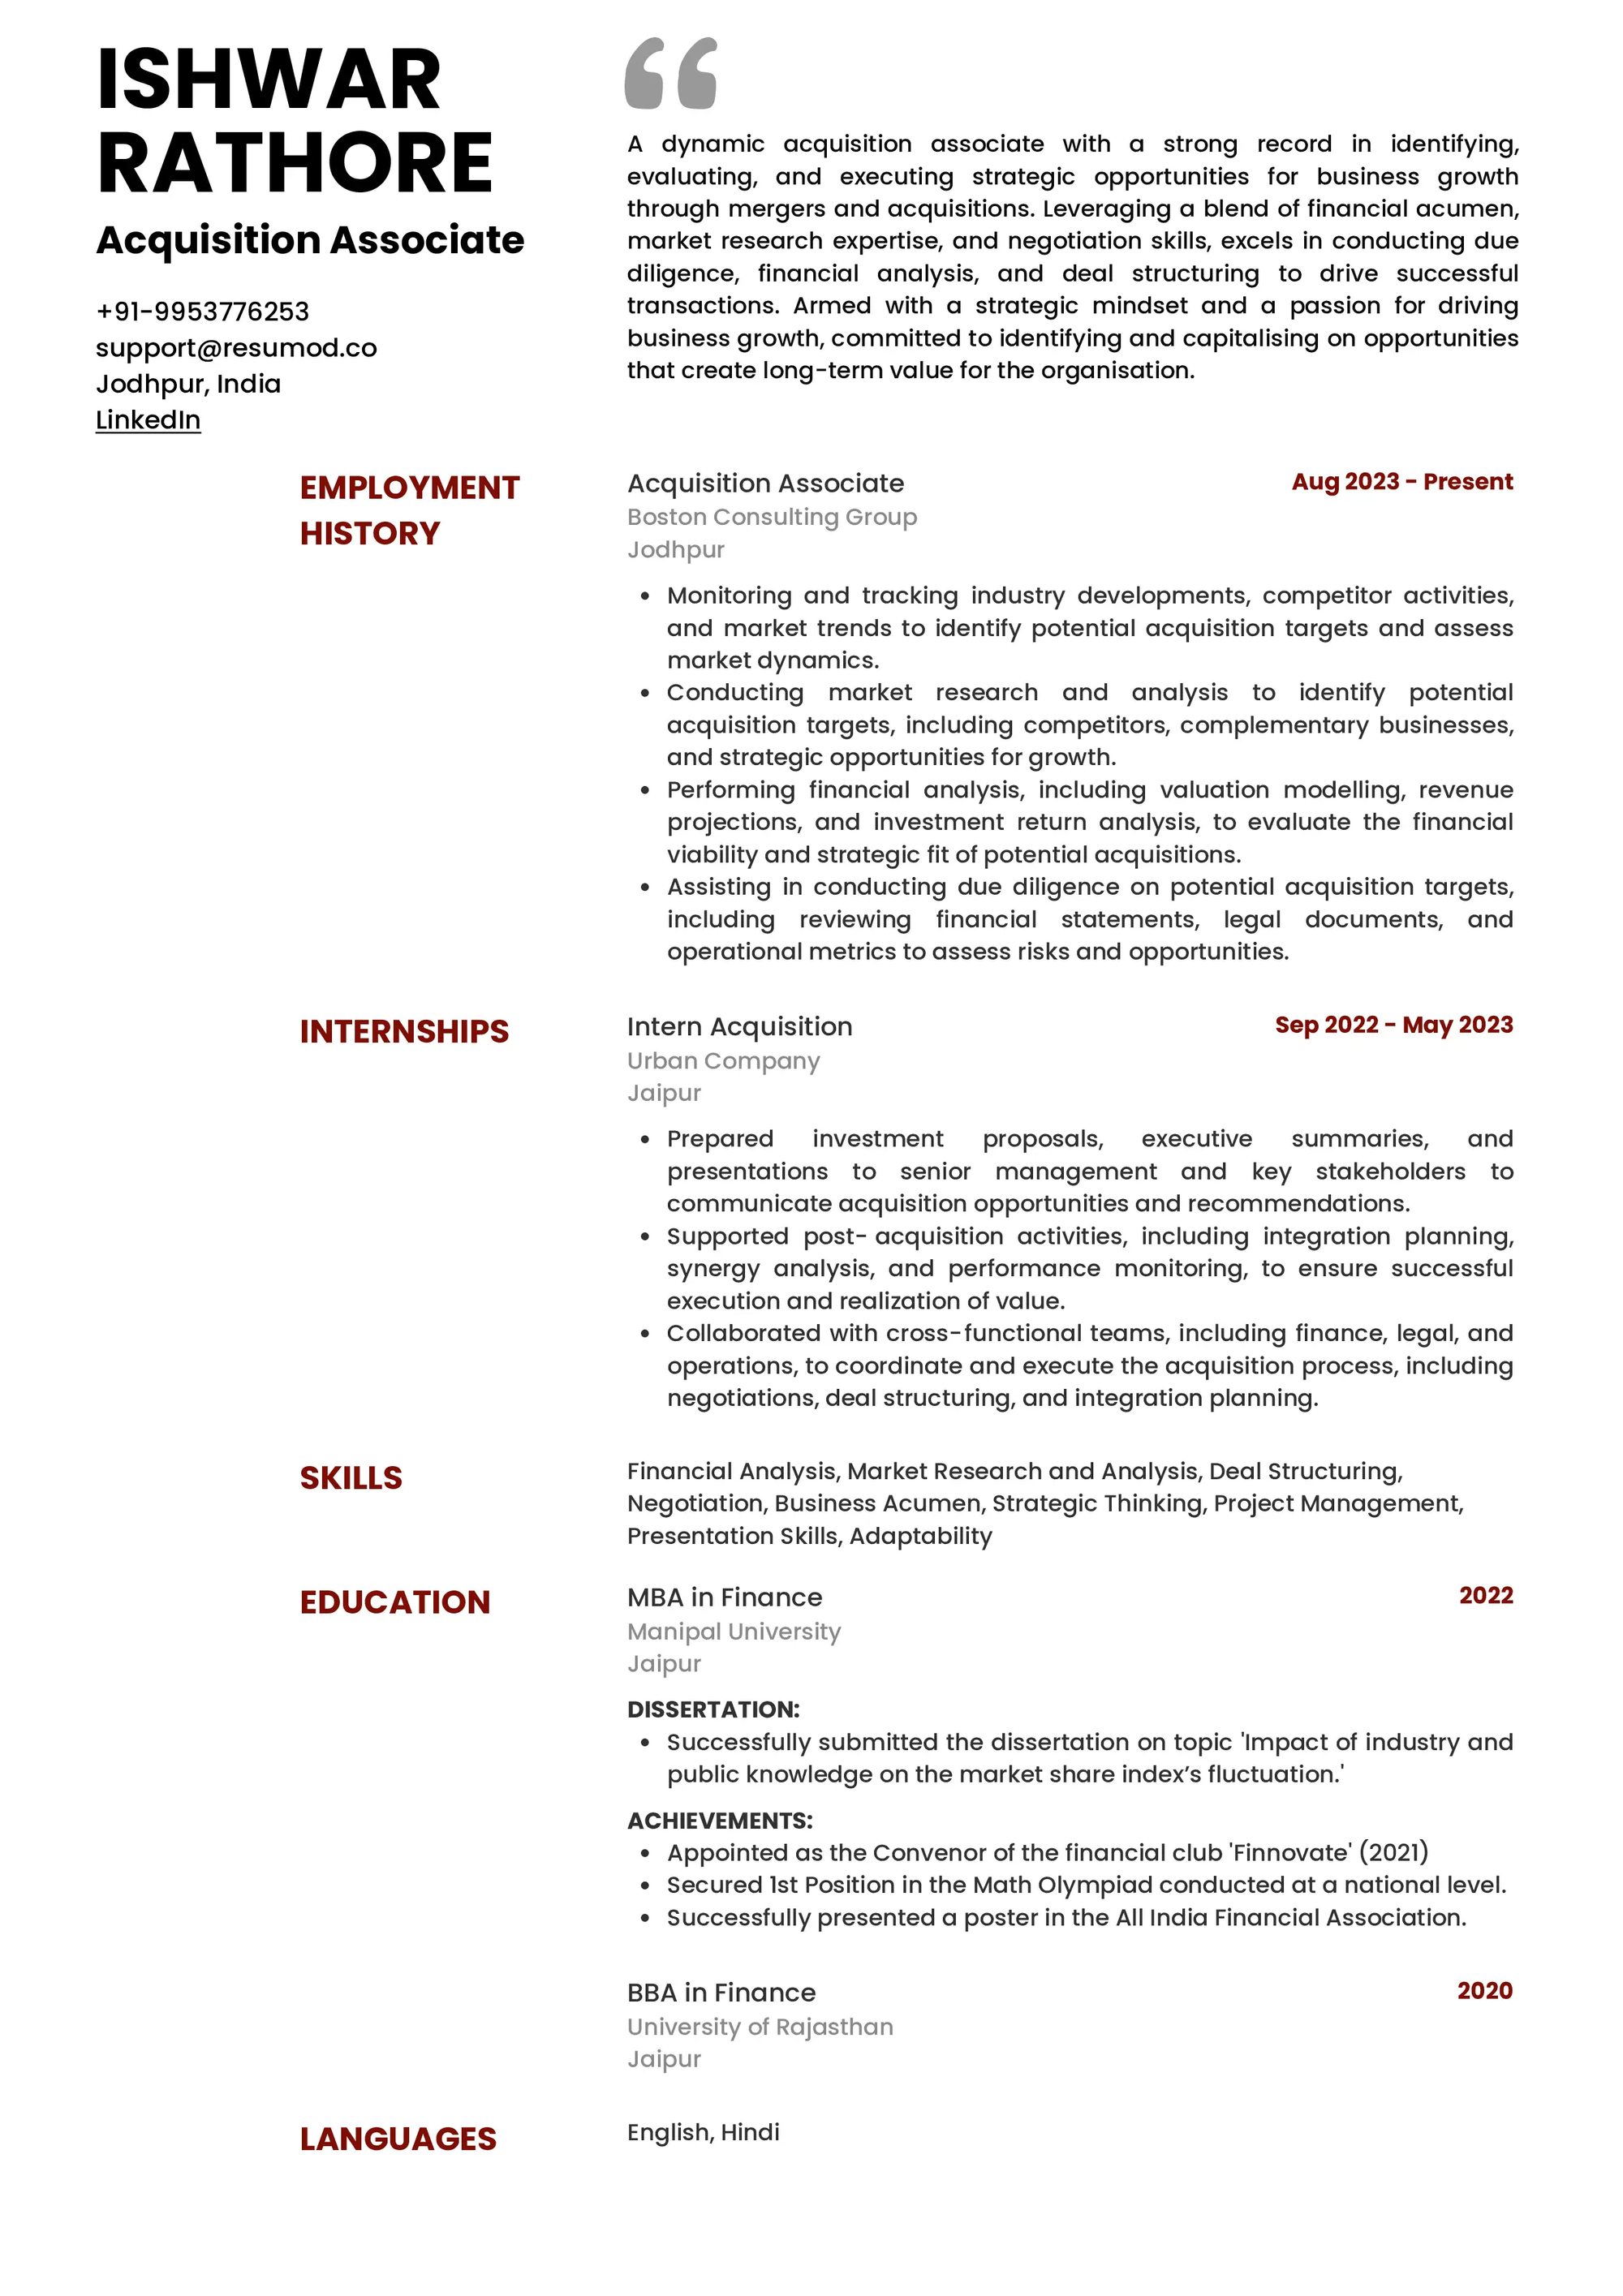 Resume of Acquisition Associate built on Resumod